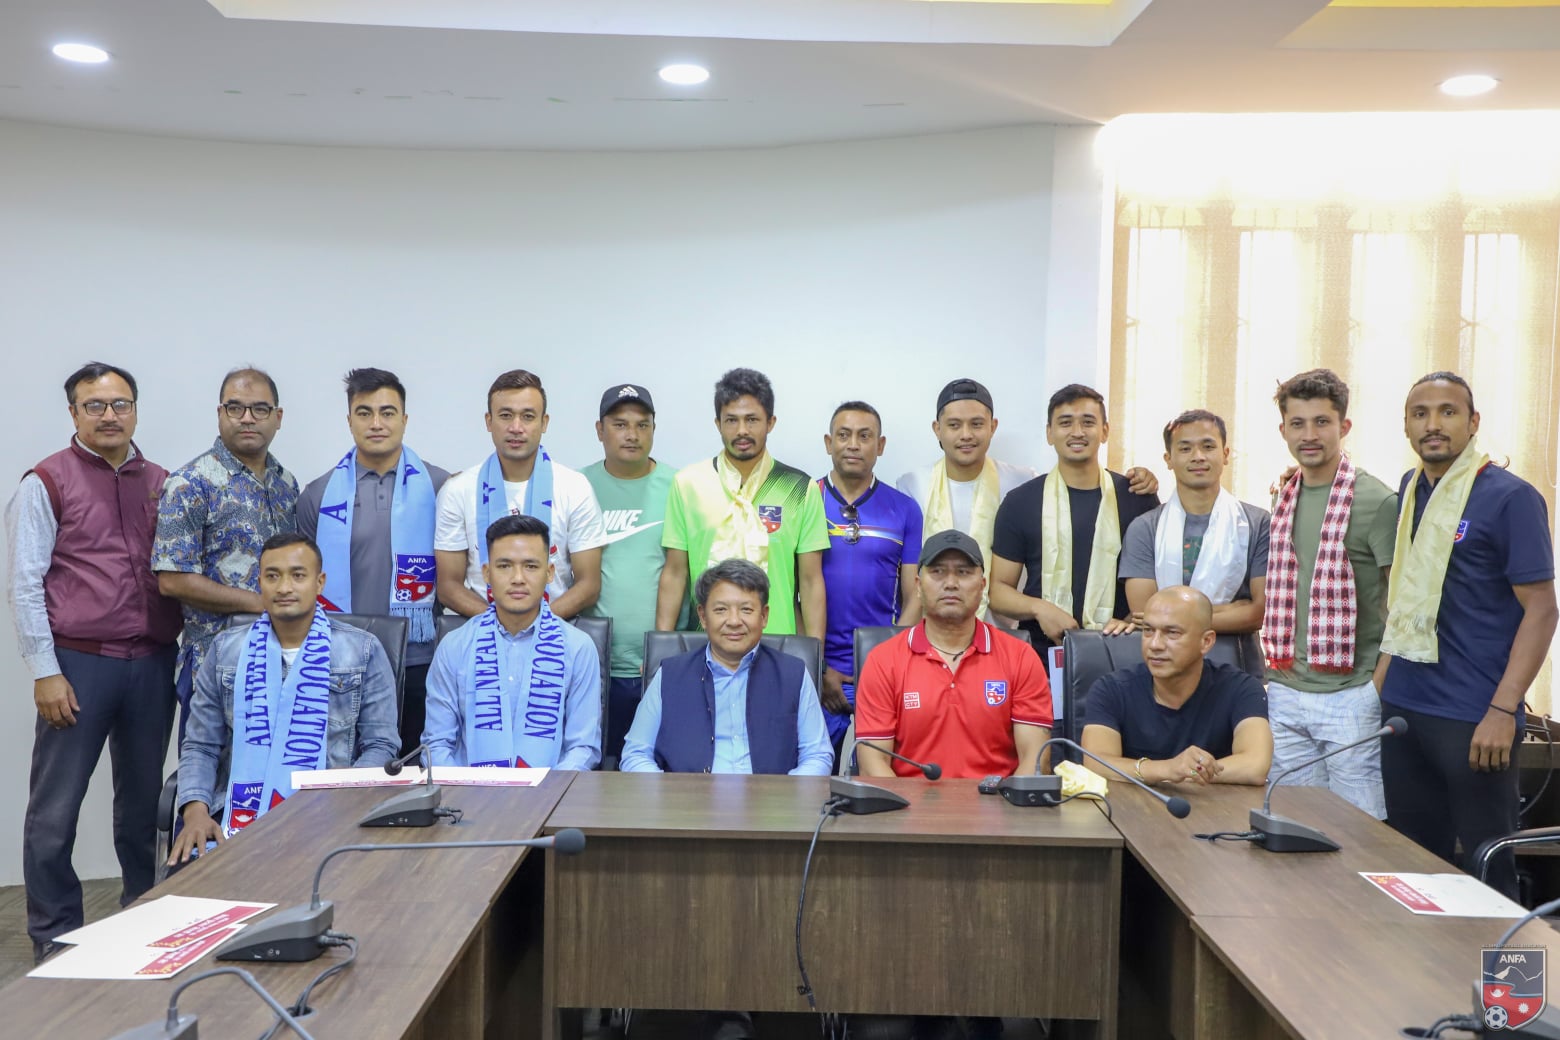 Lama elected unanimously to head Football Players Association